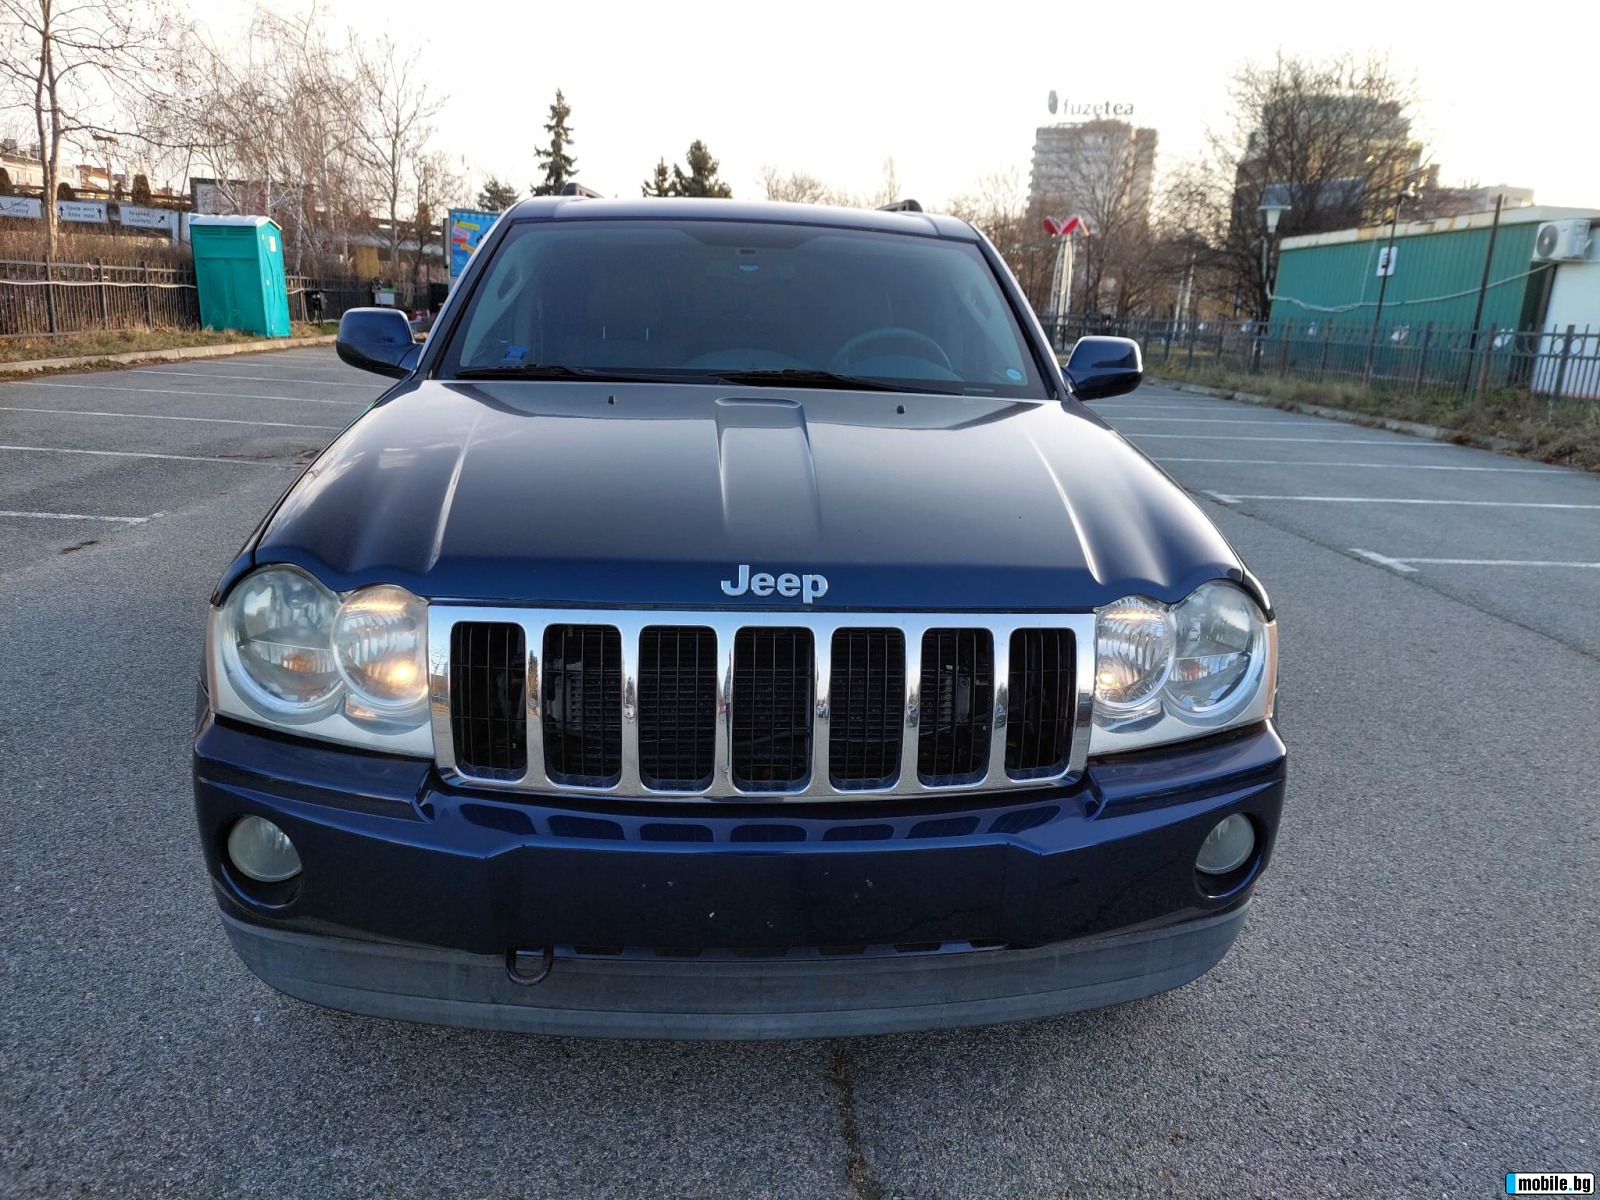 Jeep Grand cherokee 3,0CRD 218ps LIMITED | Mobile.bg   2